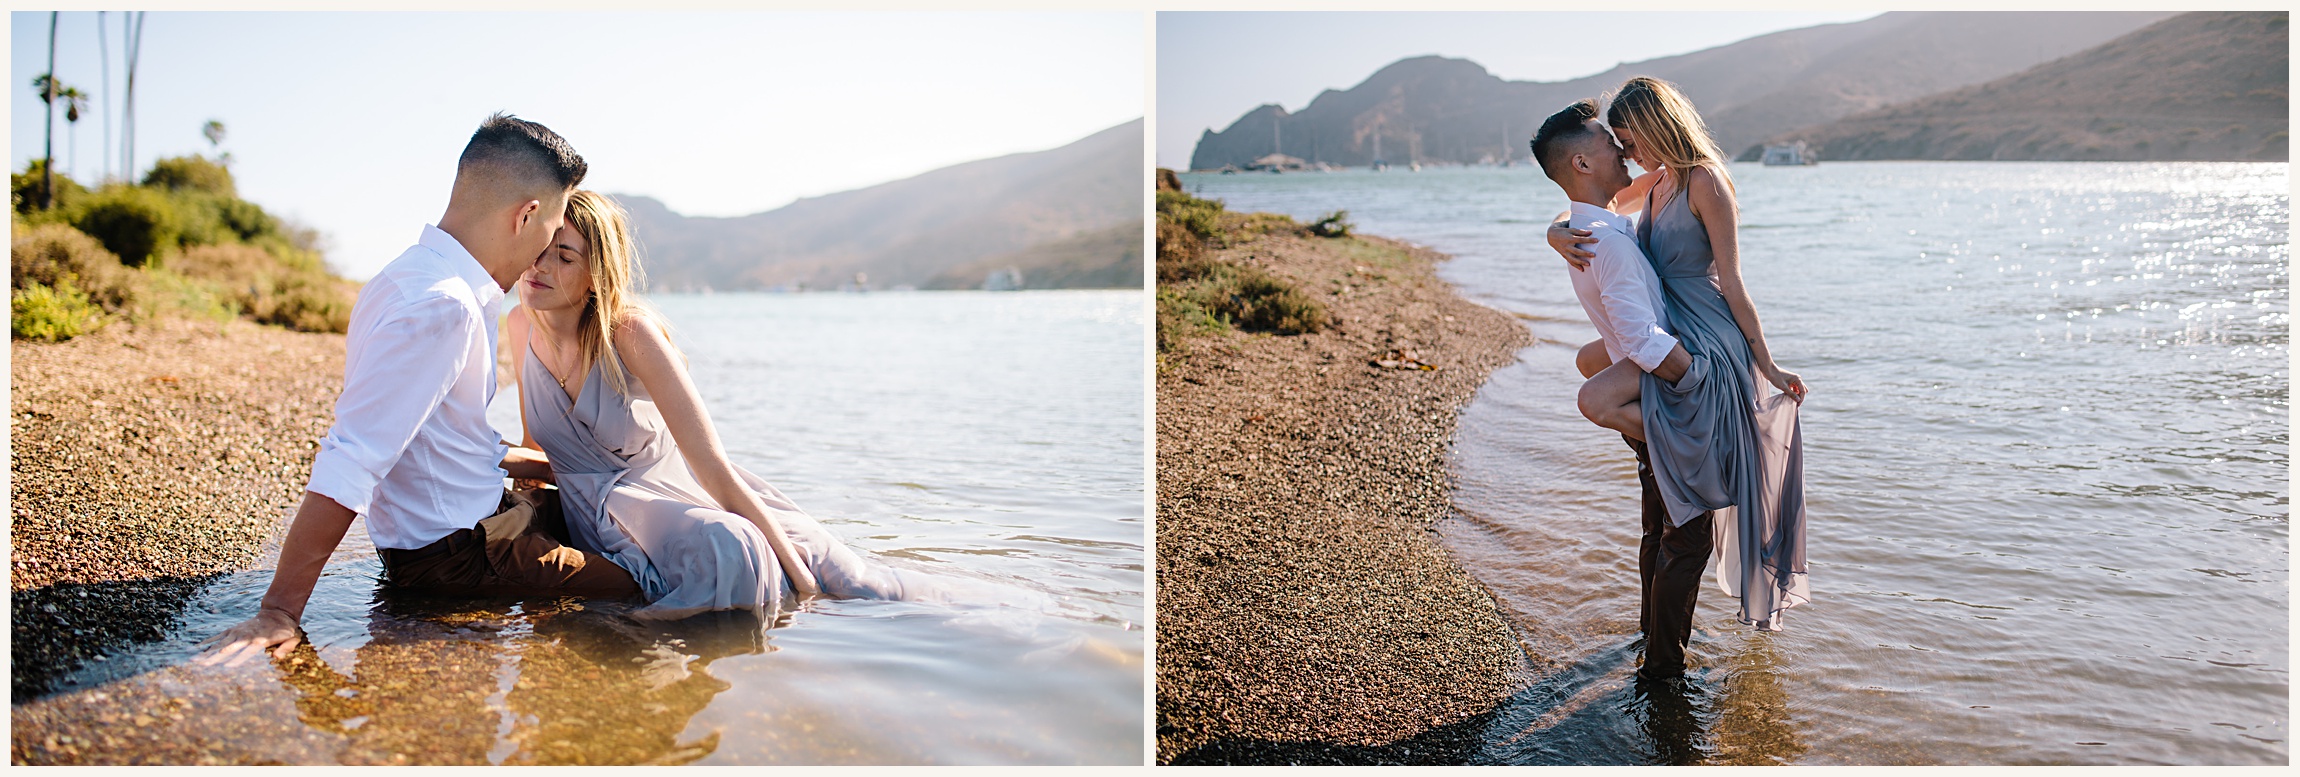 Photo bride and groom in water in Catalina Island